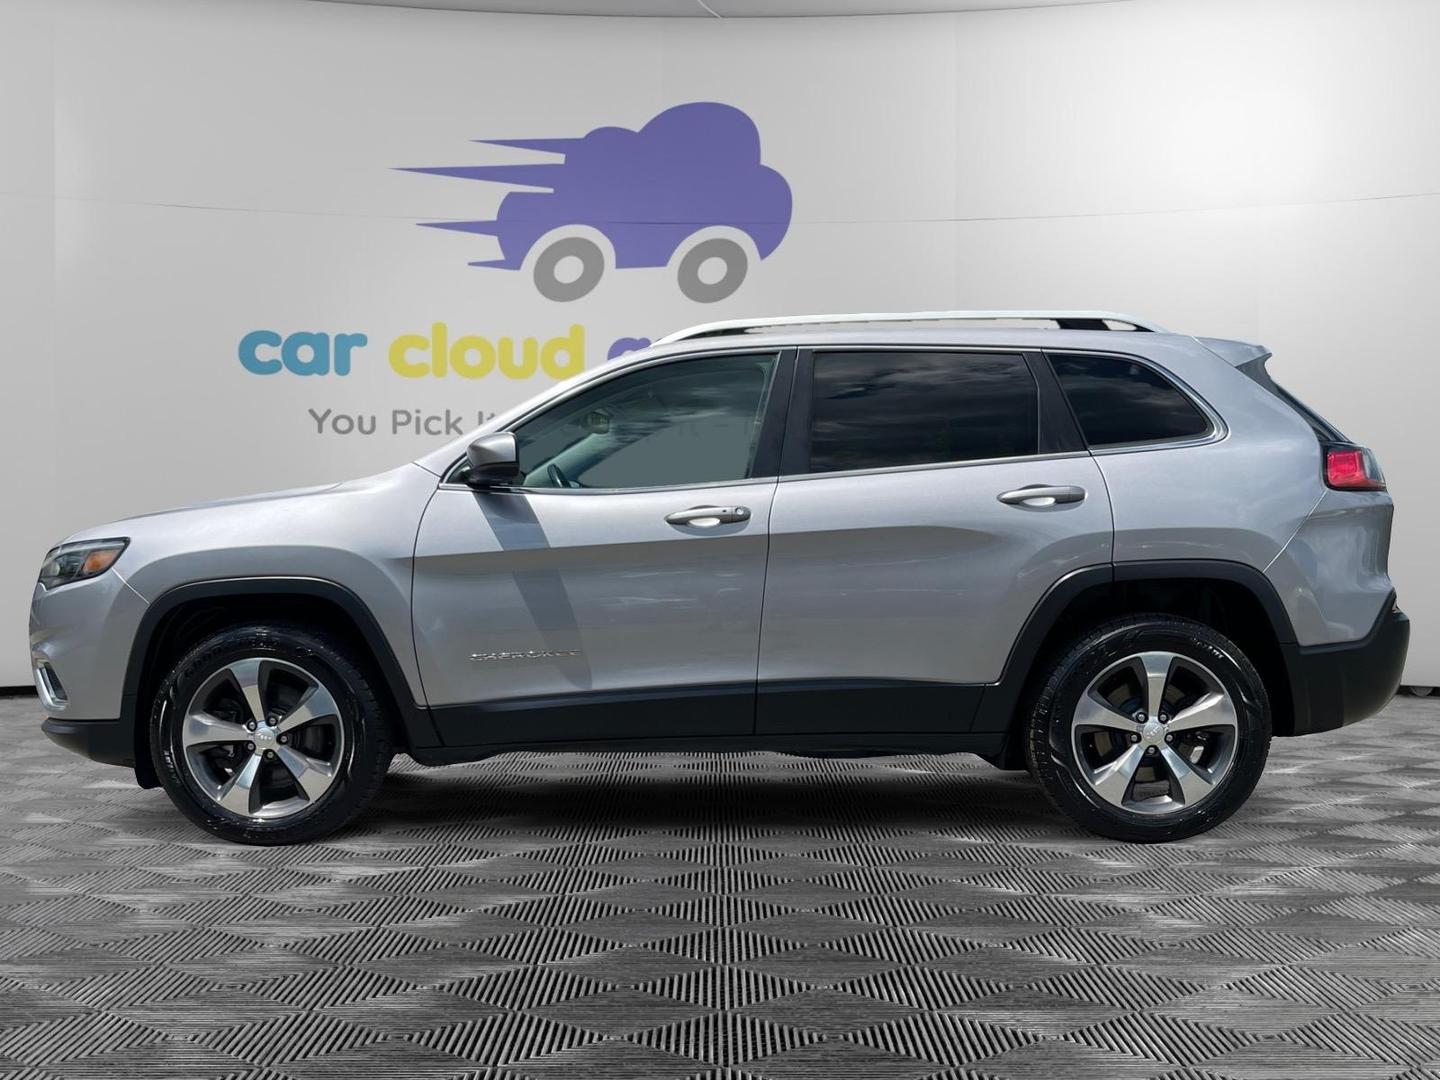 2019 Jeep Cherokee Utility 4d Limited 4wd 3.2l V6 - Image 2